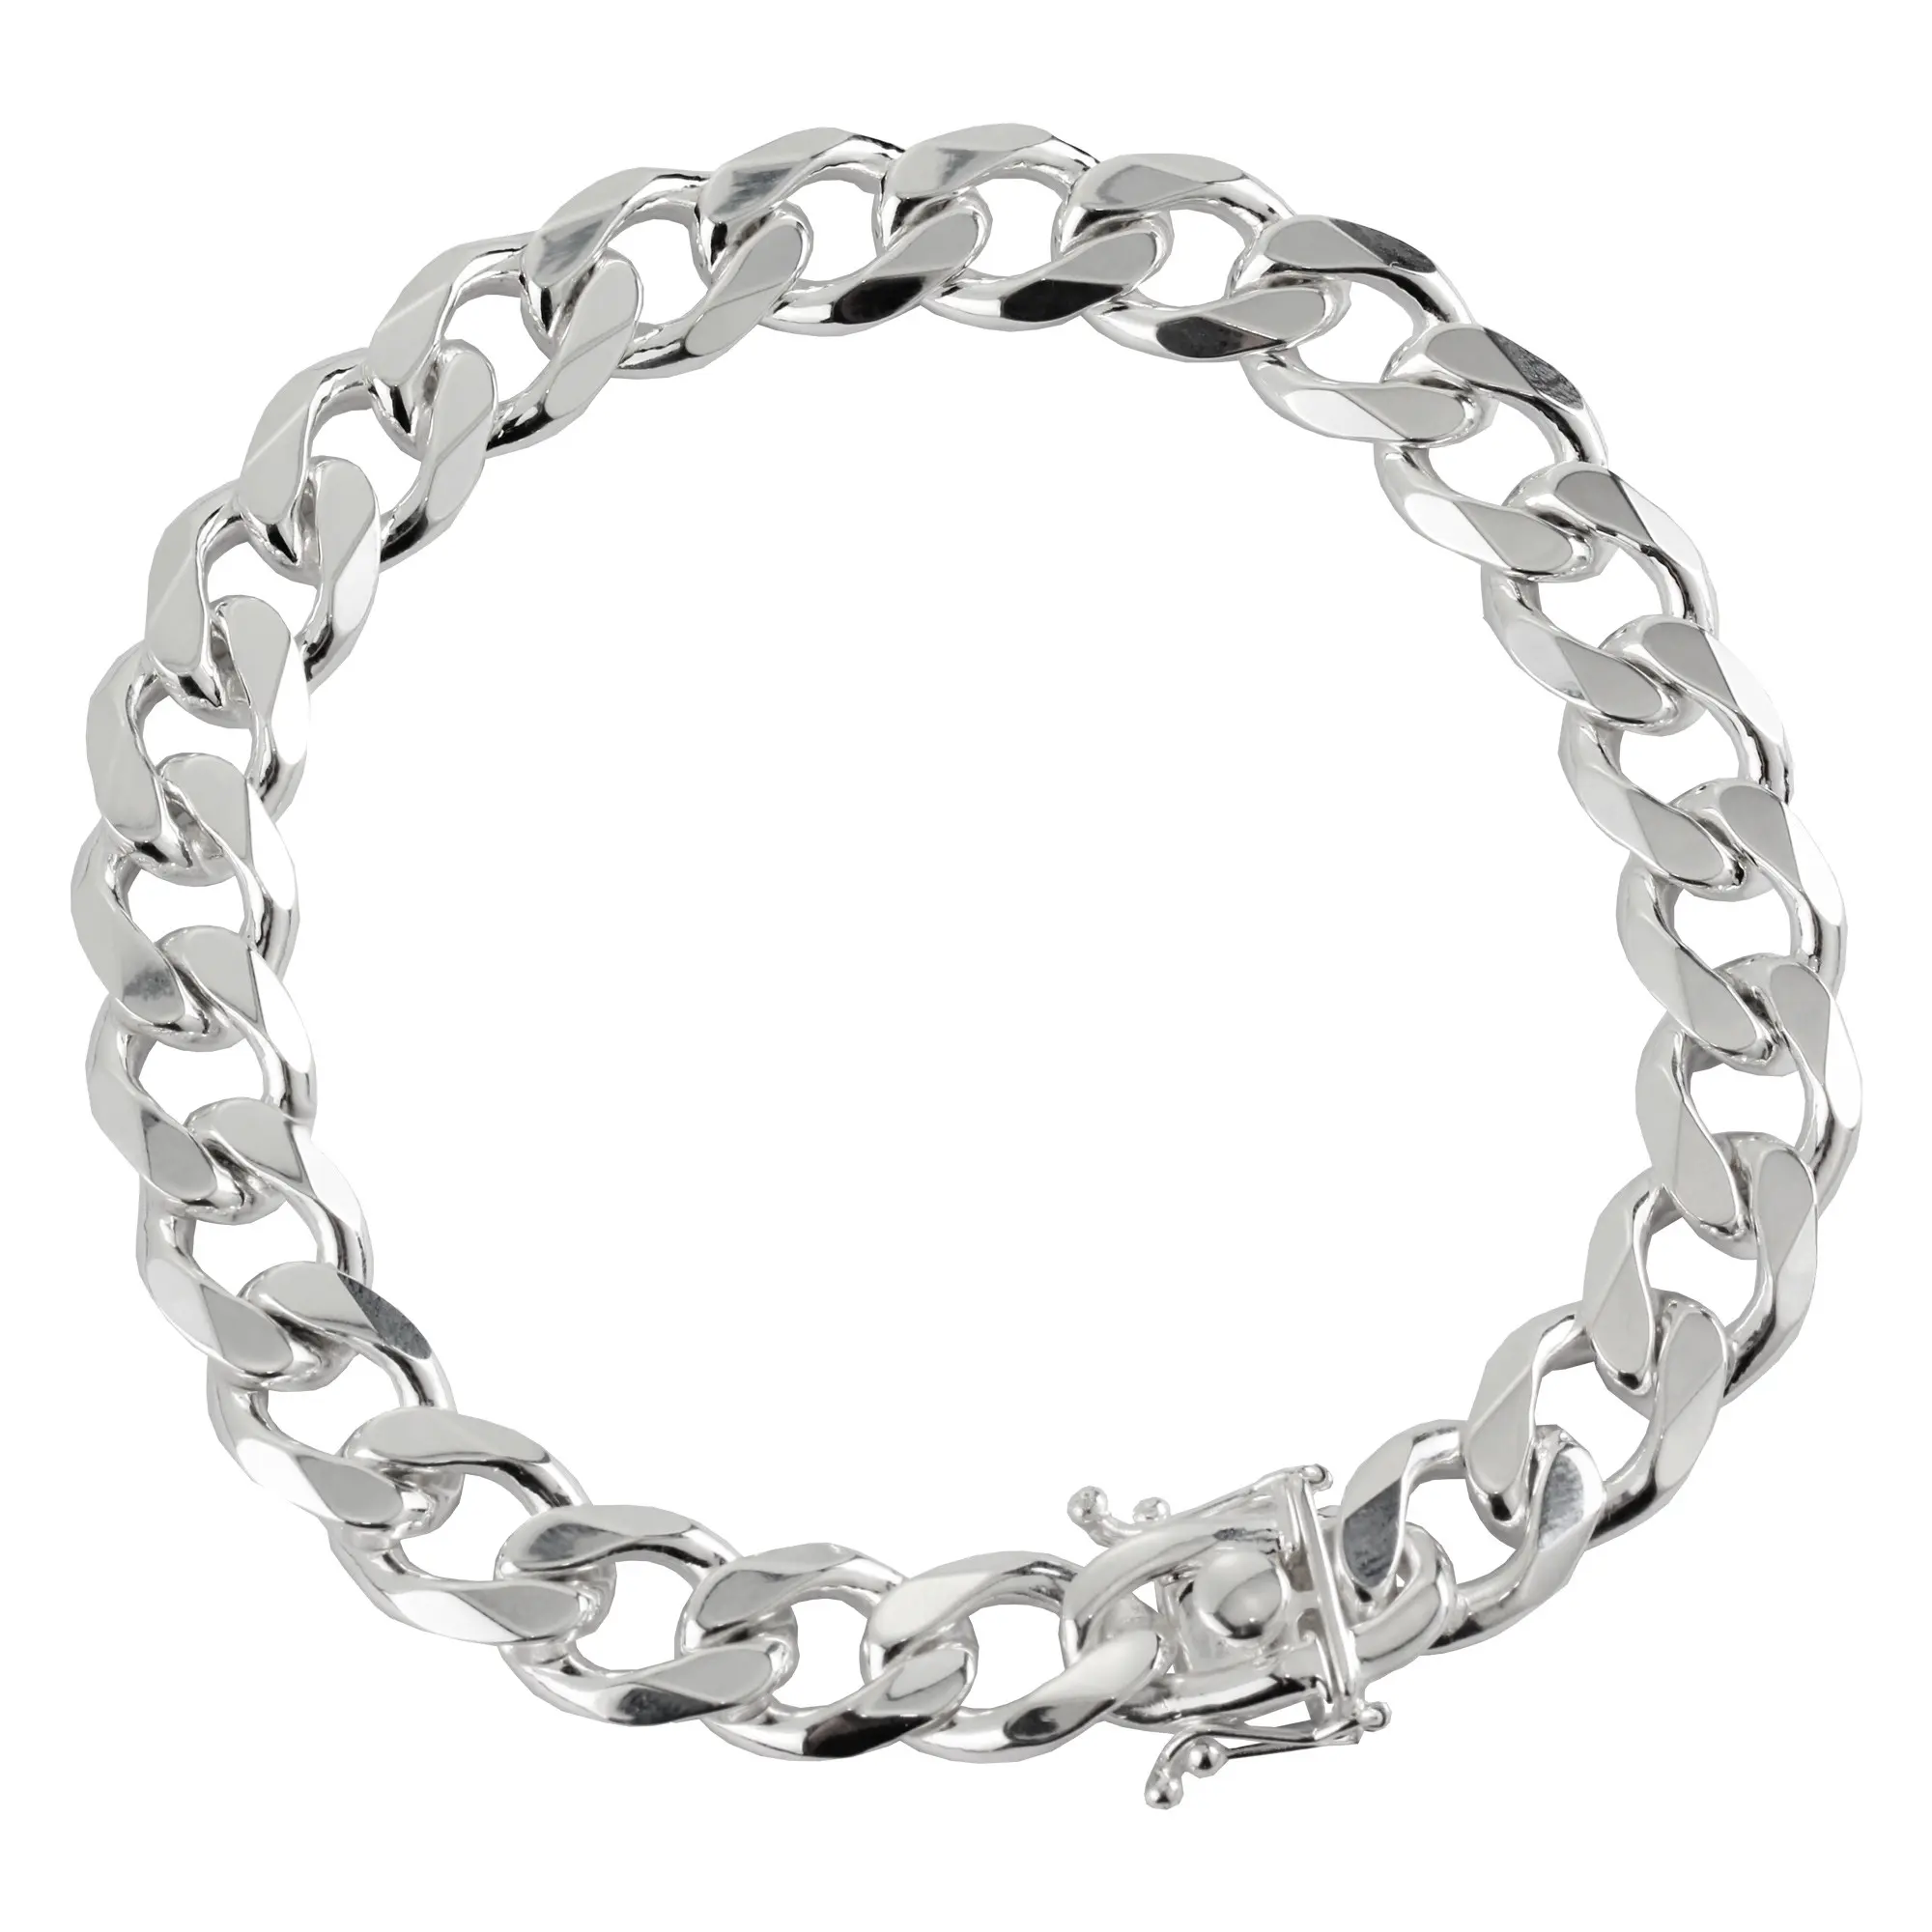 Bead bracelet in sterling silver, 7.5 long and 10 mm.